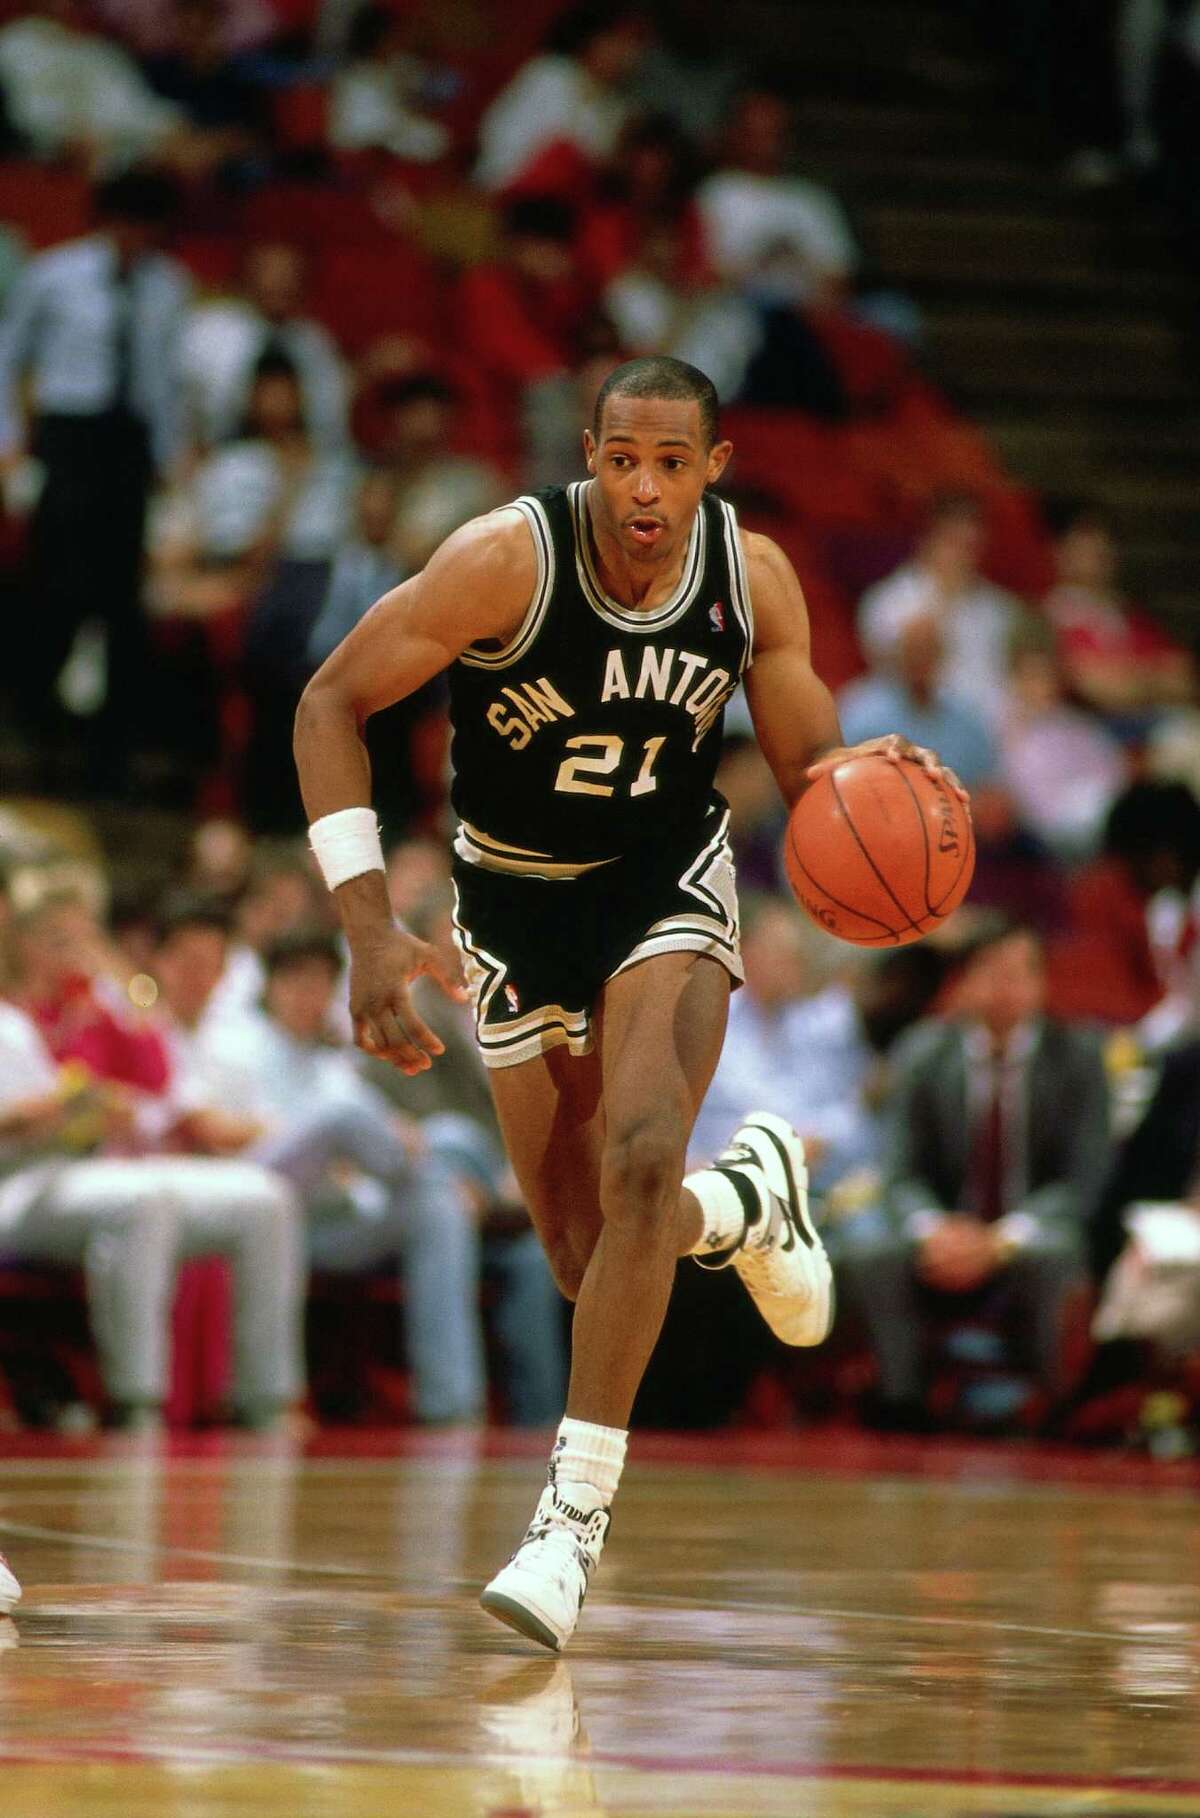 Alvin Robertson Alvin Robertson earned gold for the United States in the 1984 games in Los Angeles and later played 389 games in a five-season career with the Spurs that included four All-Star Game appearances and the NBA Defensive Player of the Year award in 1986.